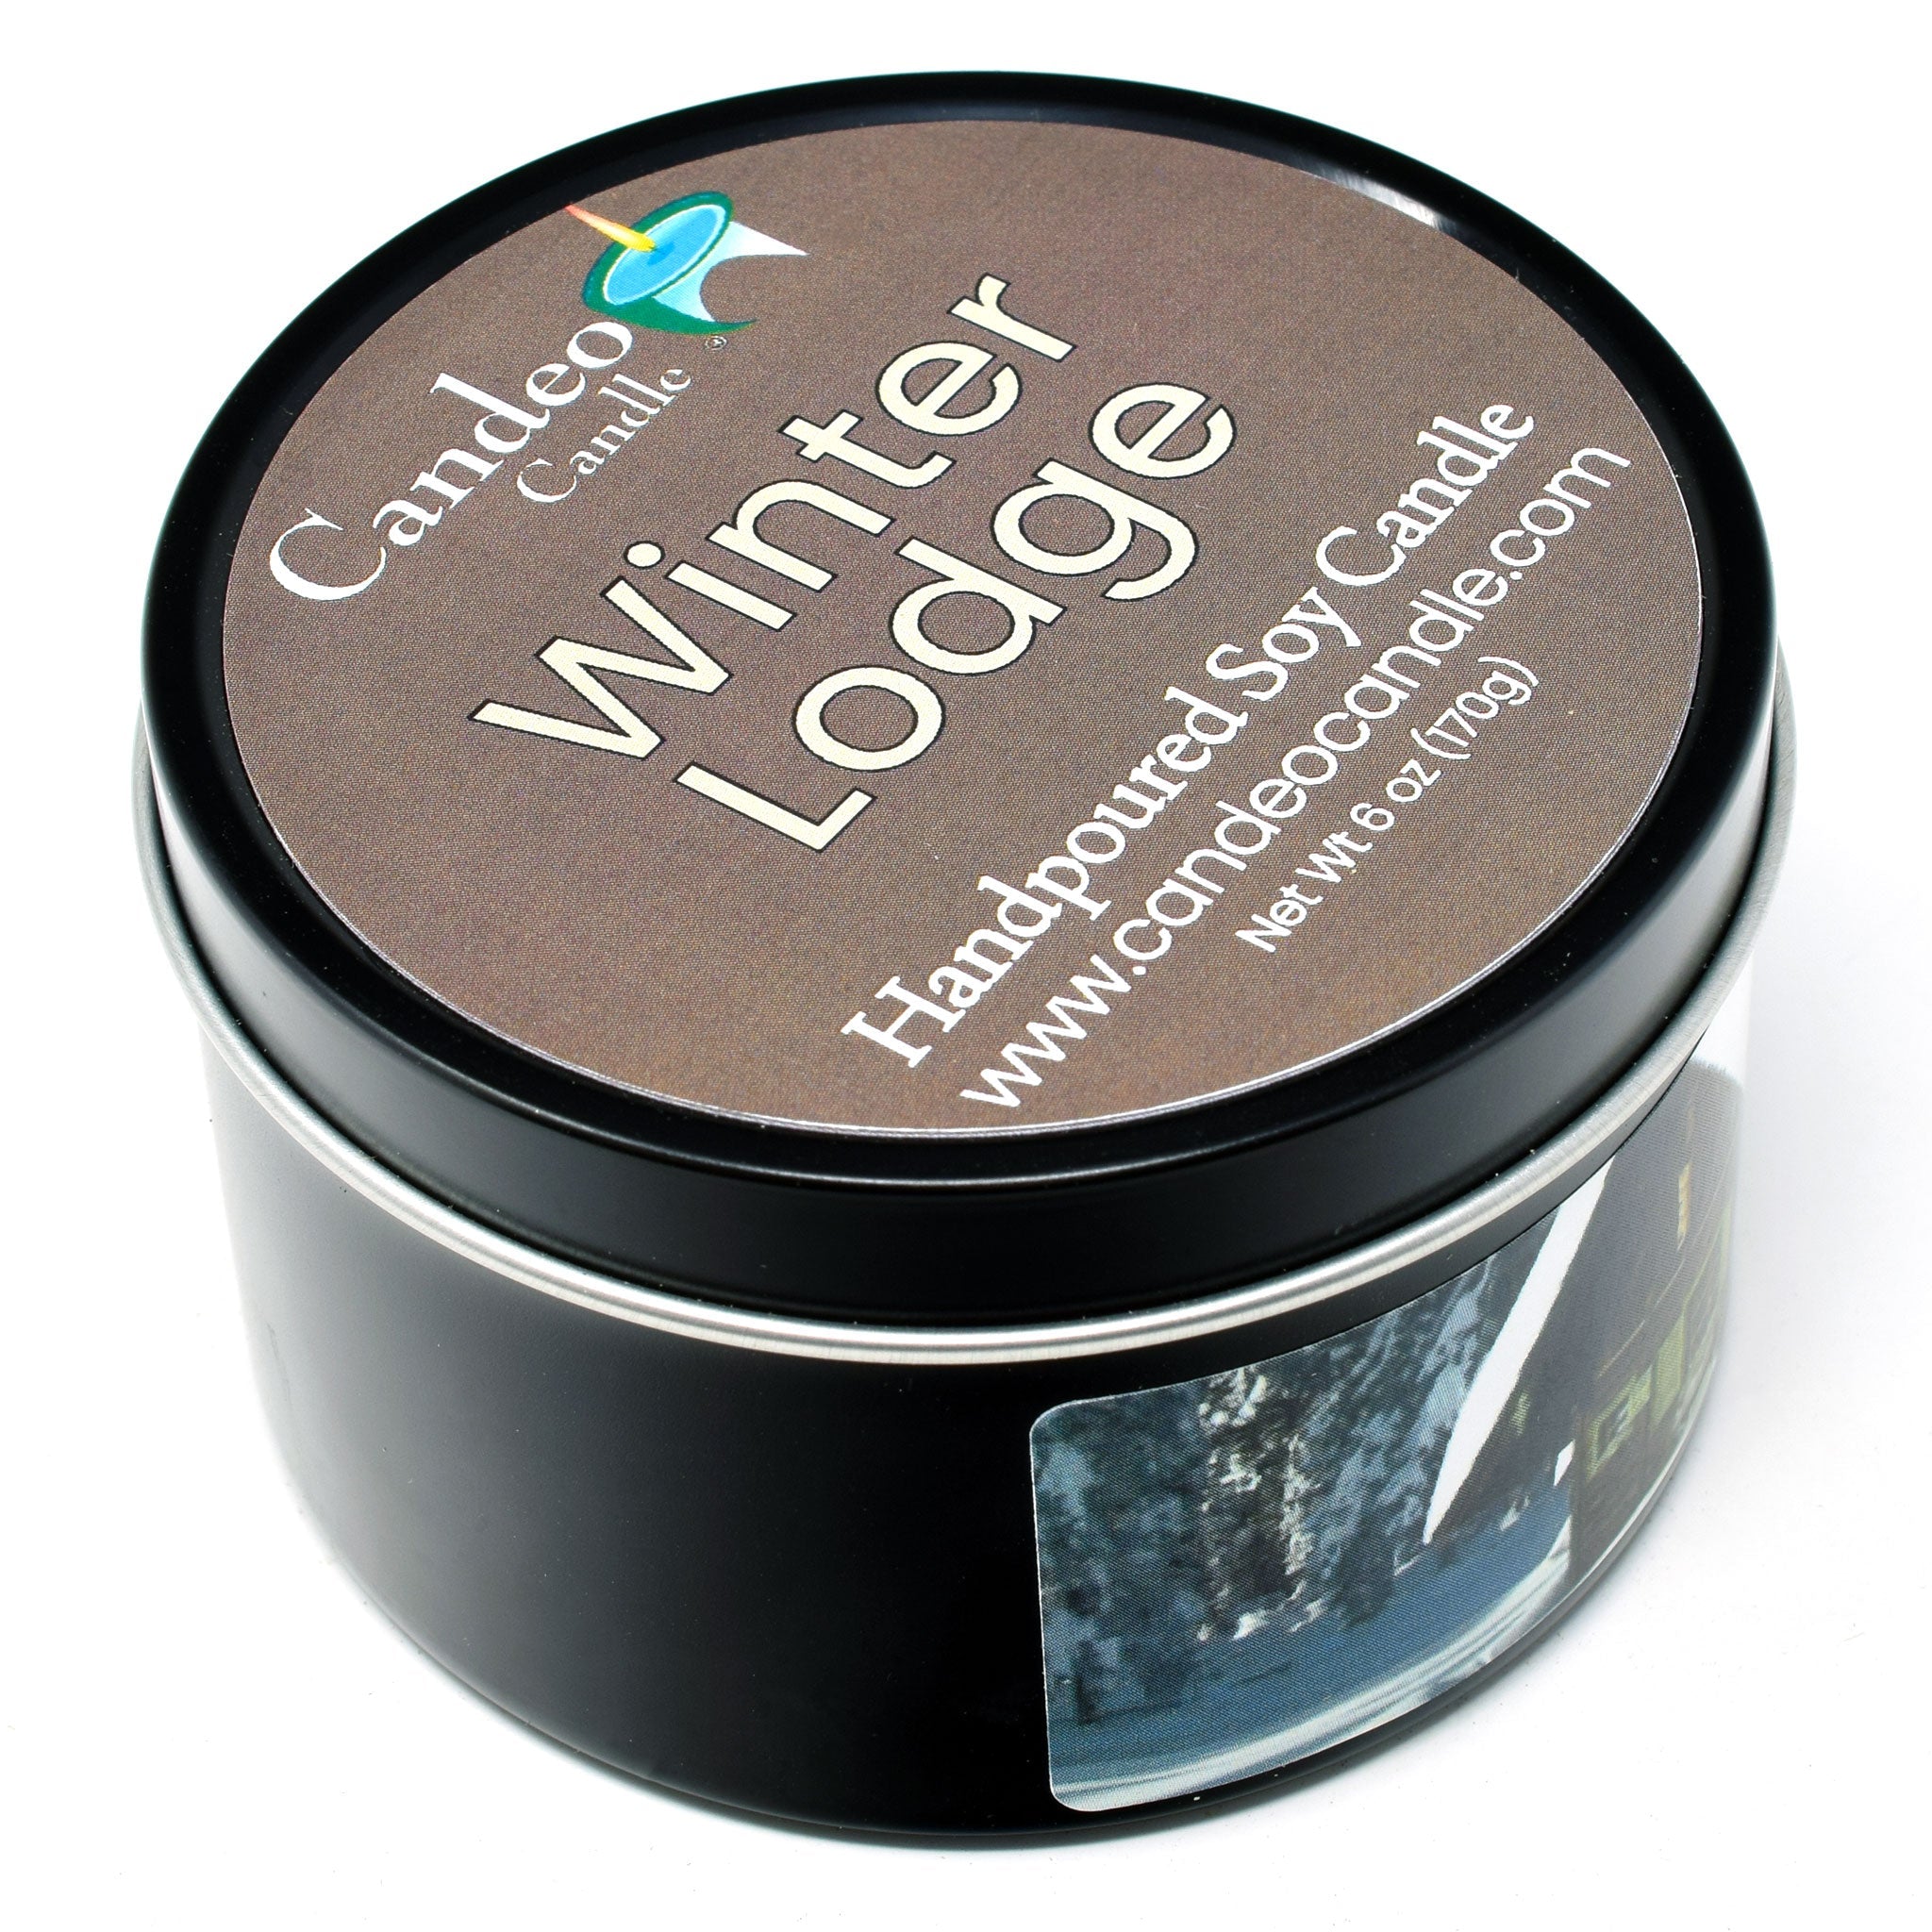 Winter Lodge, 6oz Soy Candle Tin - Candeo Candle